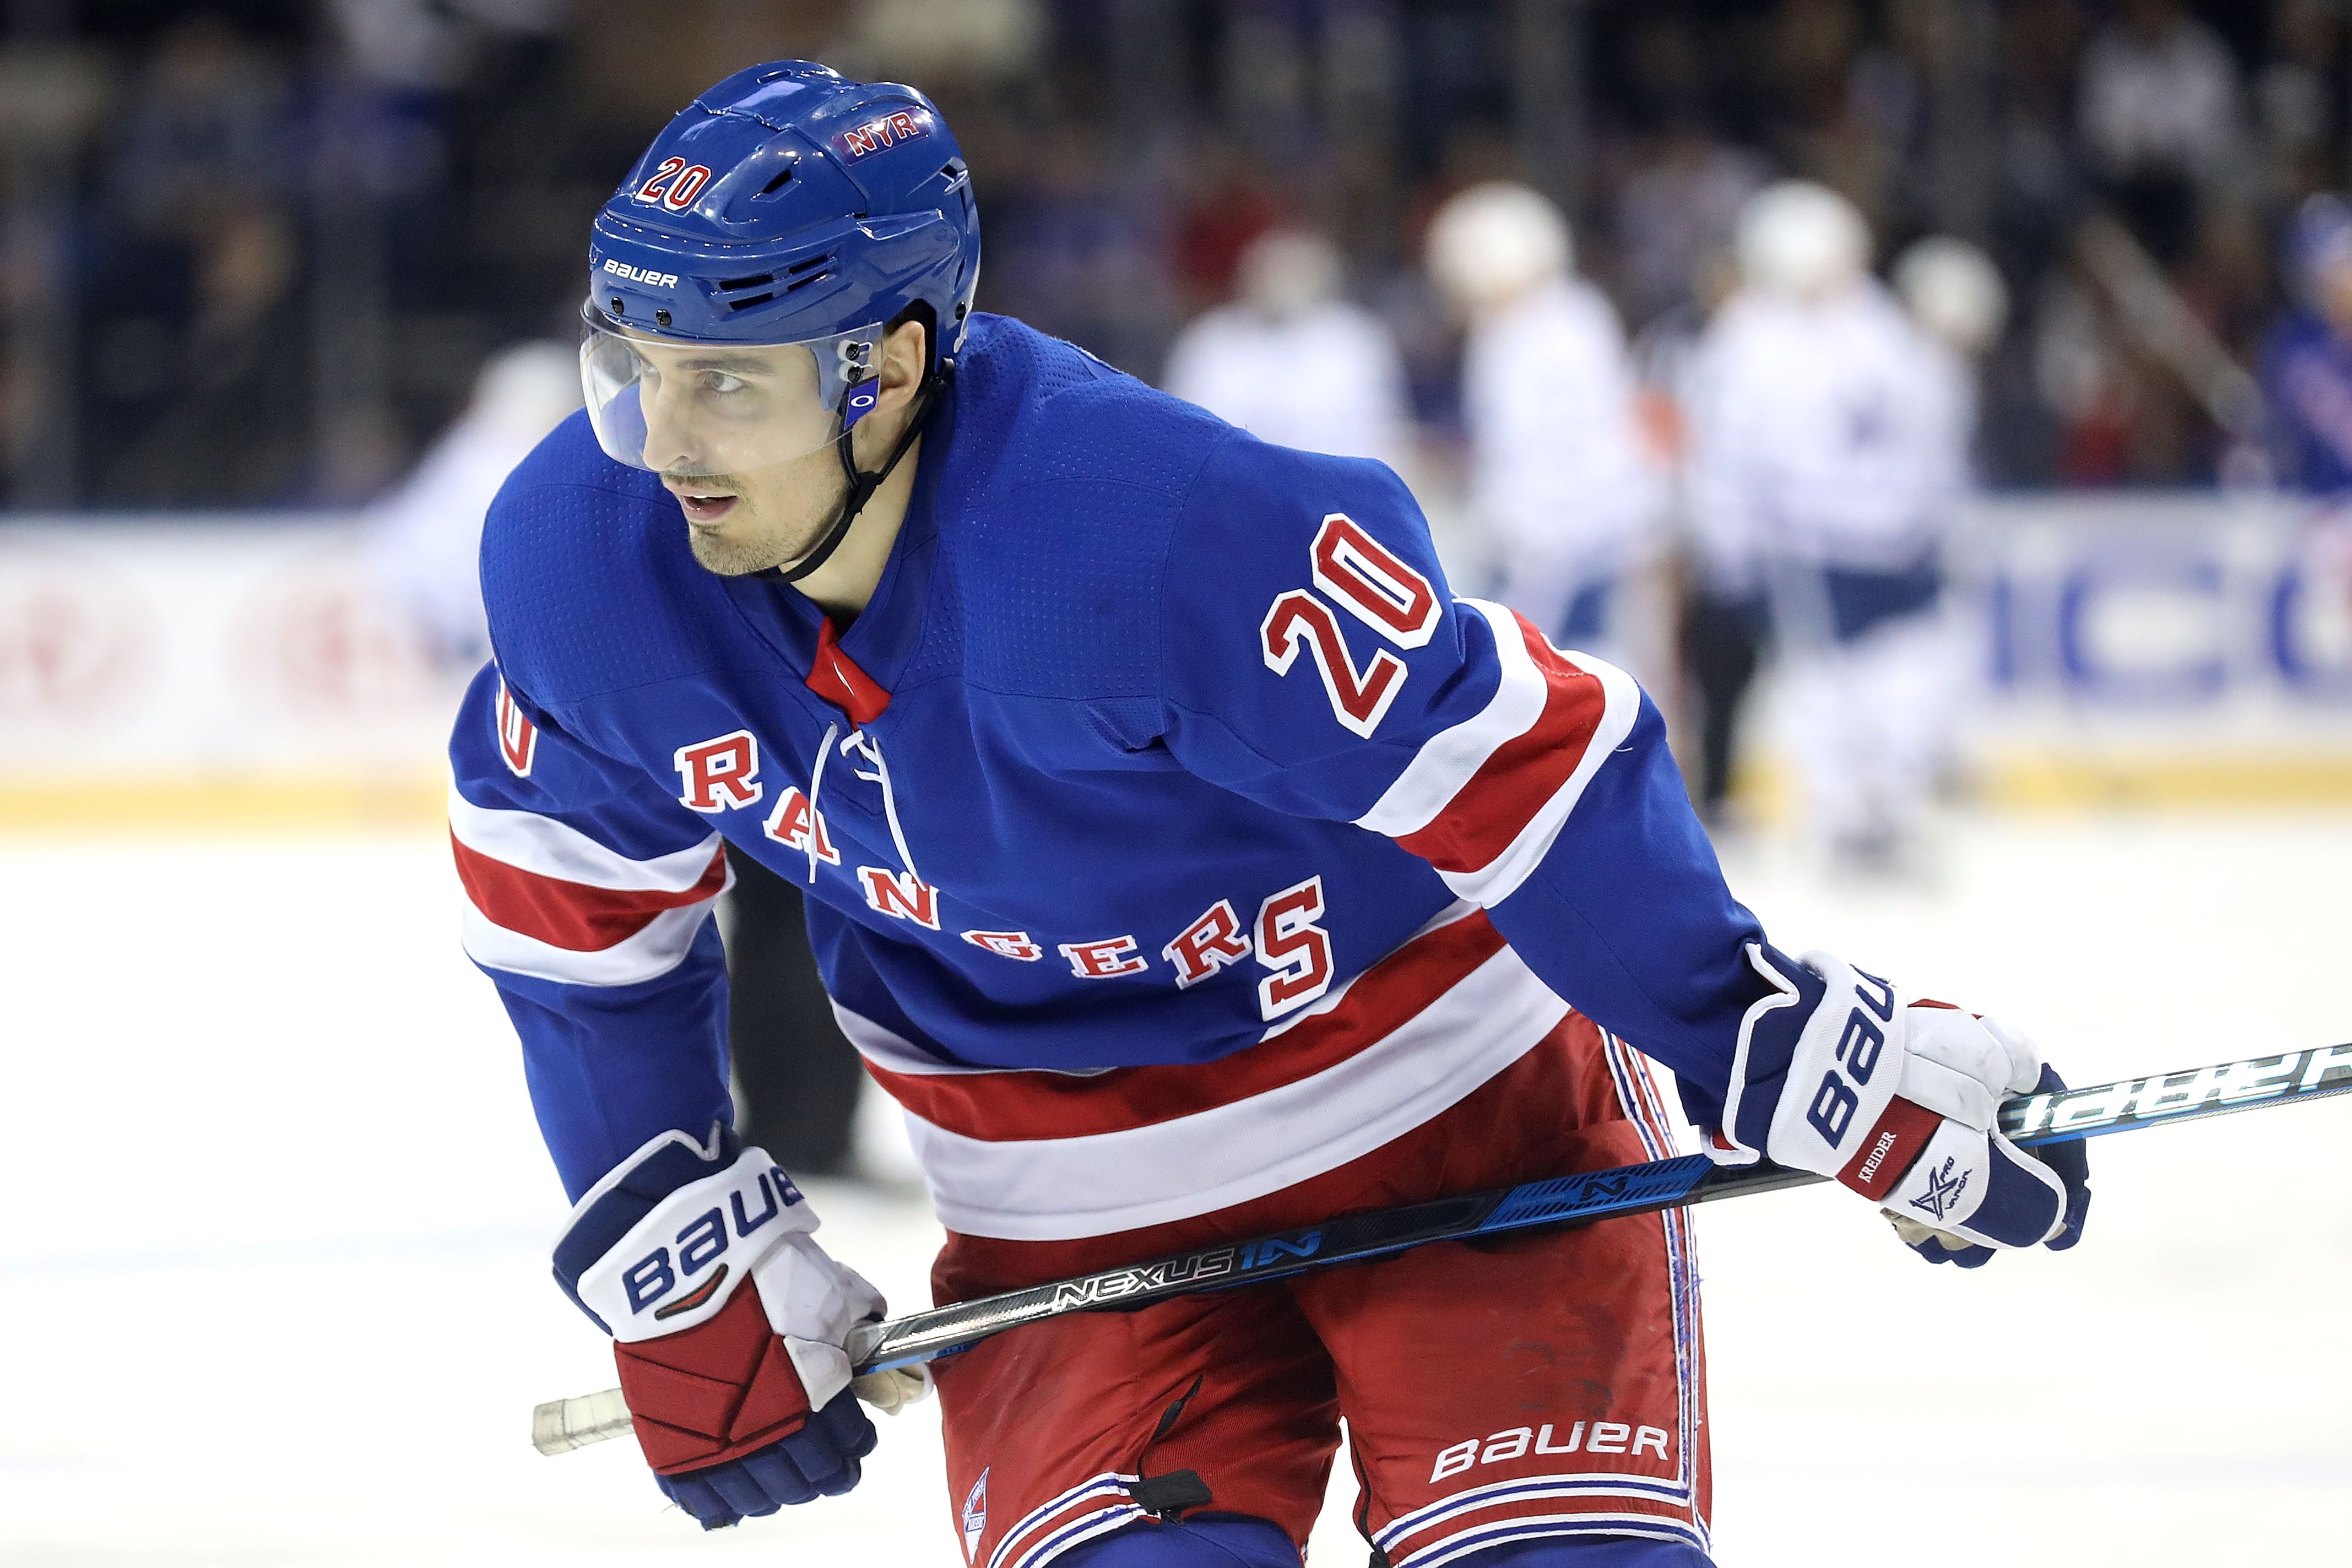 Would the New York Rangers benefit from a Chris Kreider trade